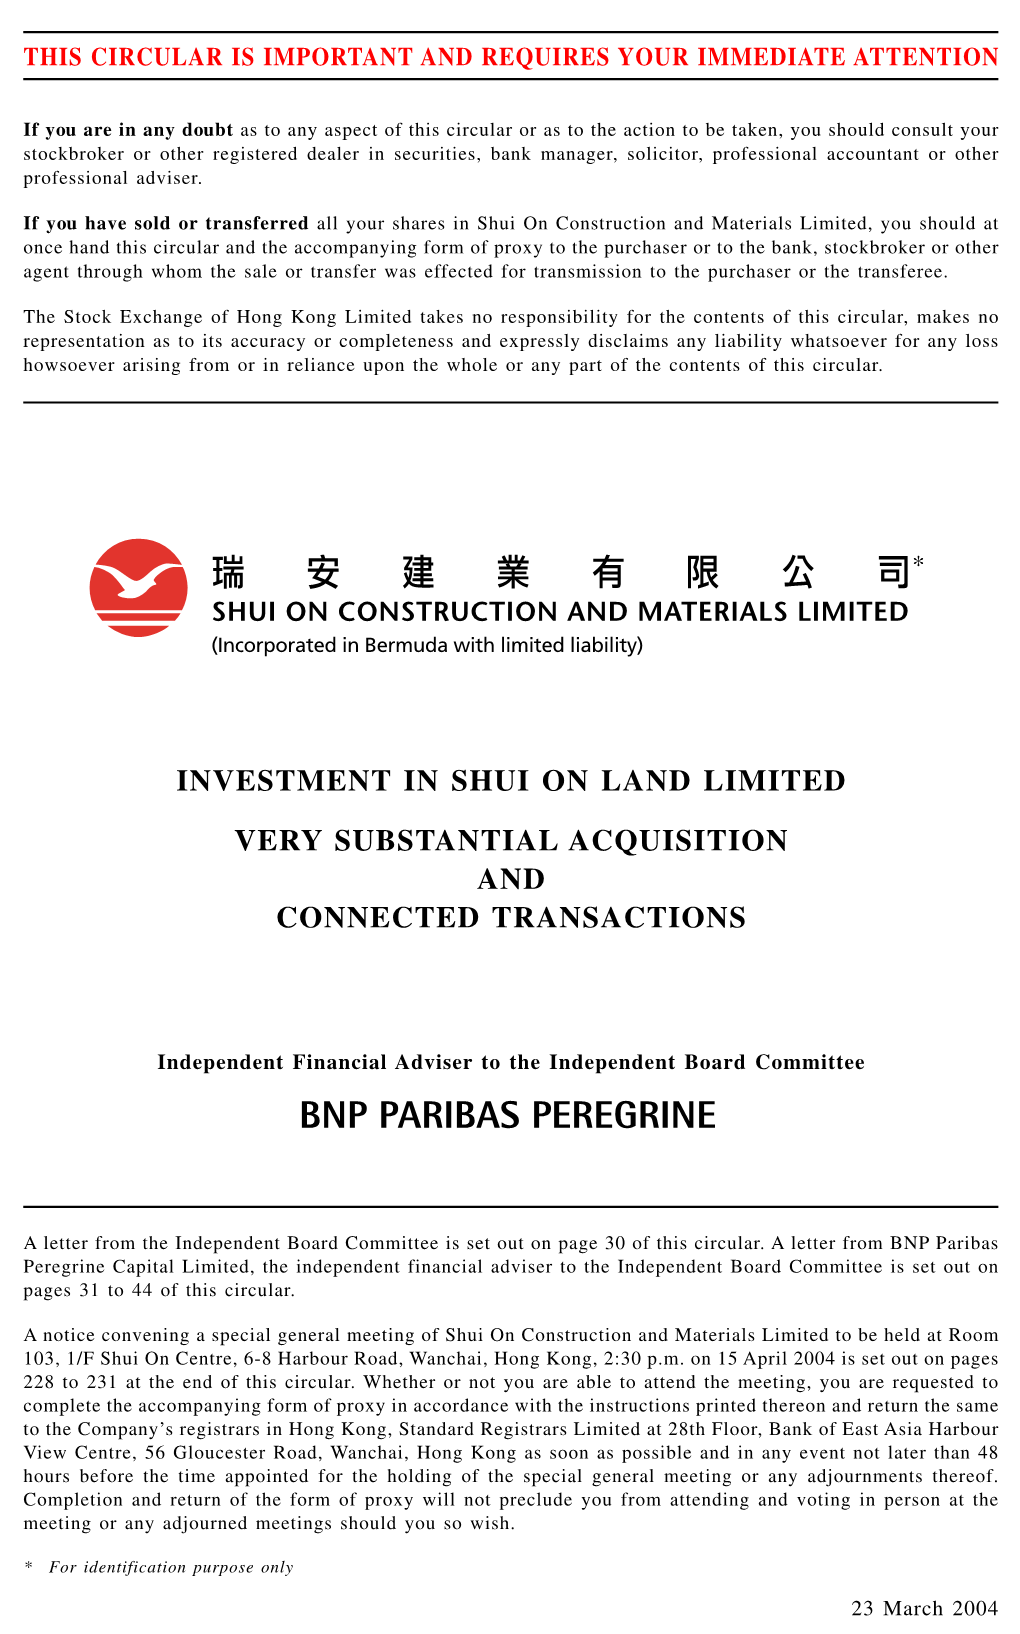 Investment in Shui on Land Limited Very Substantial Acquisition and Connected Transactions